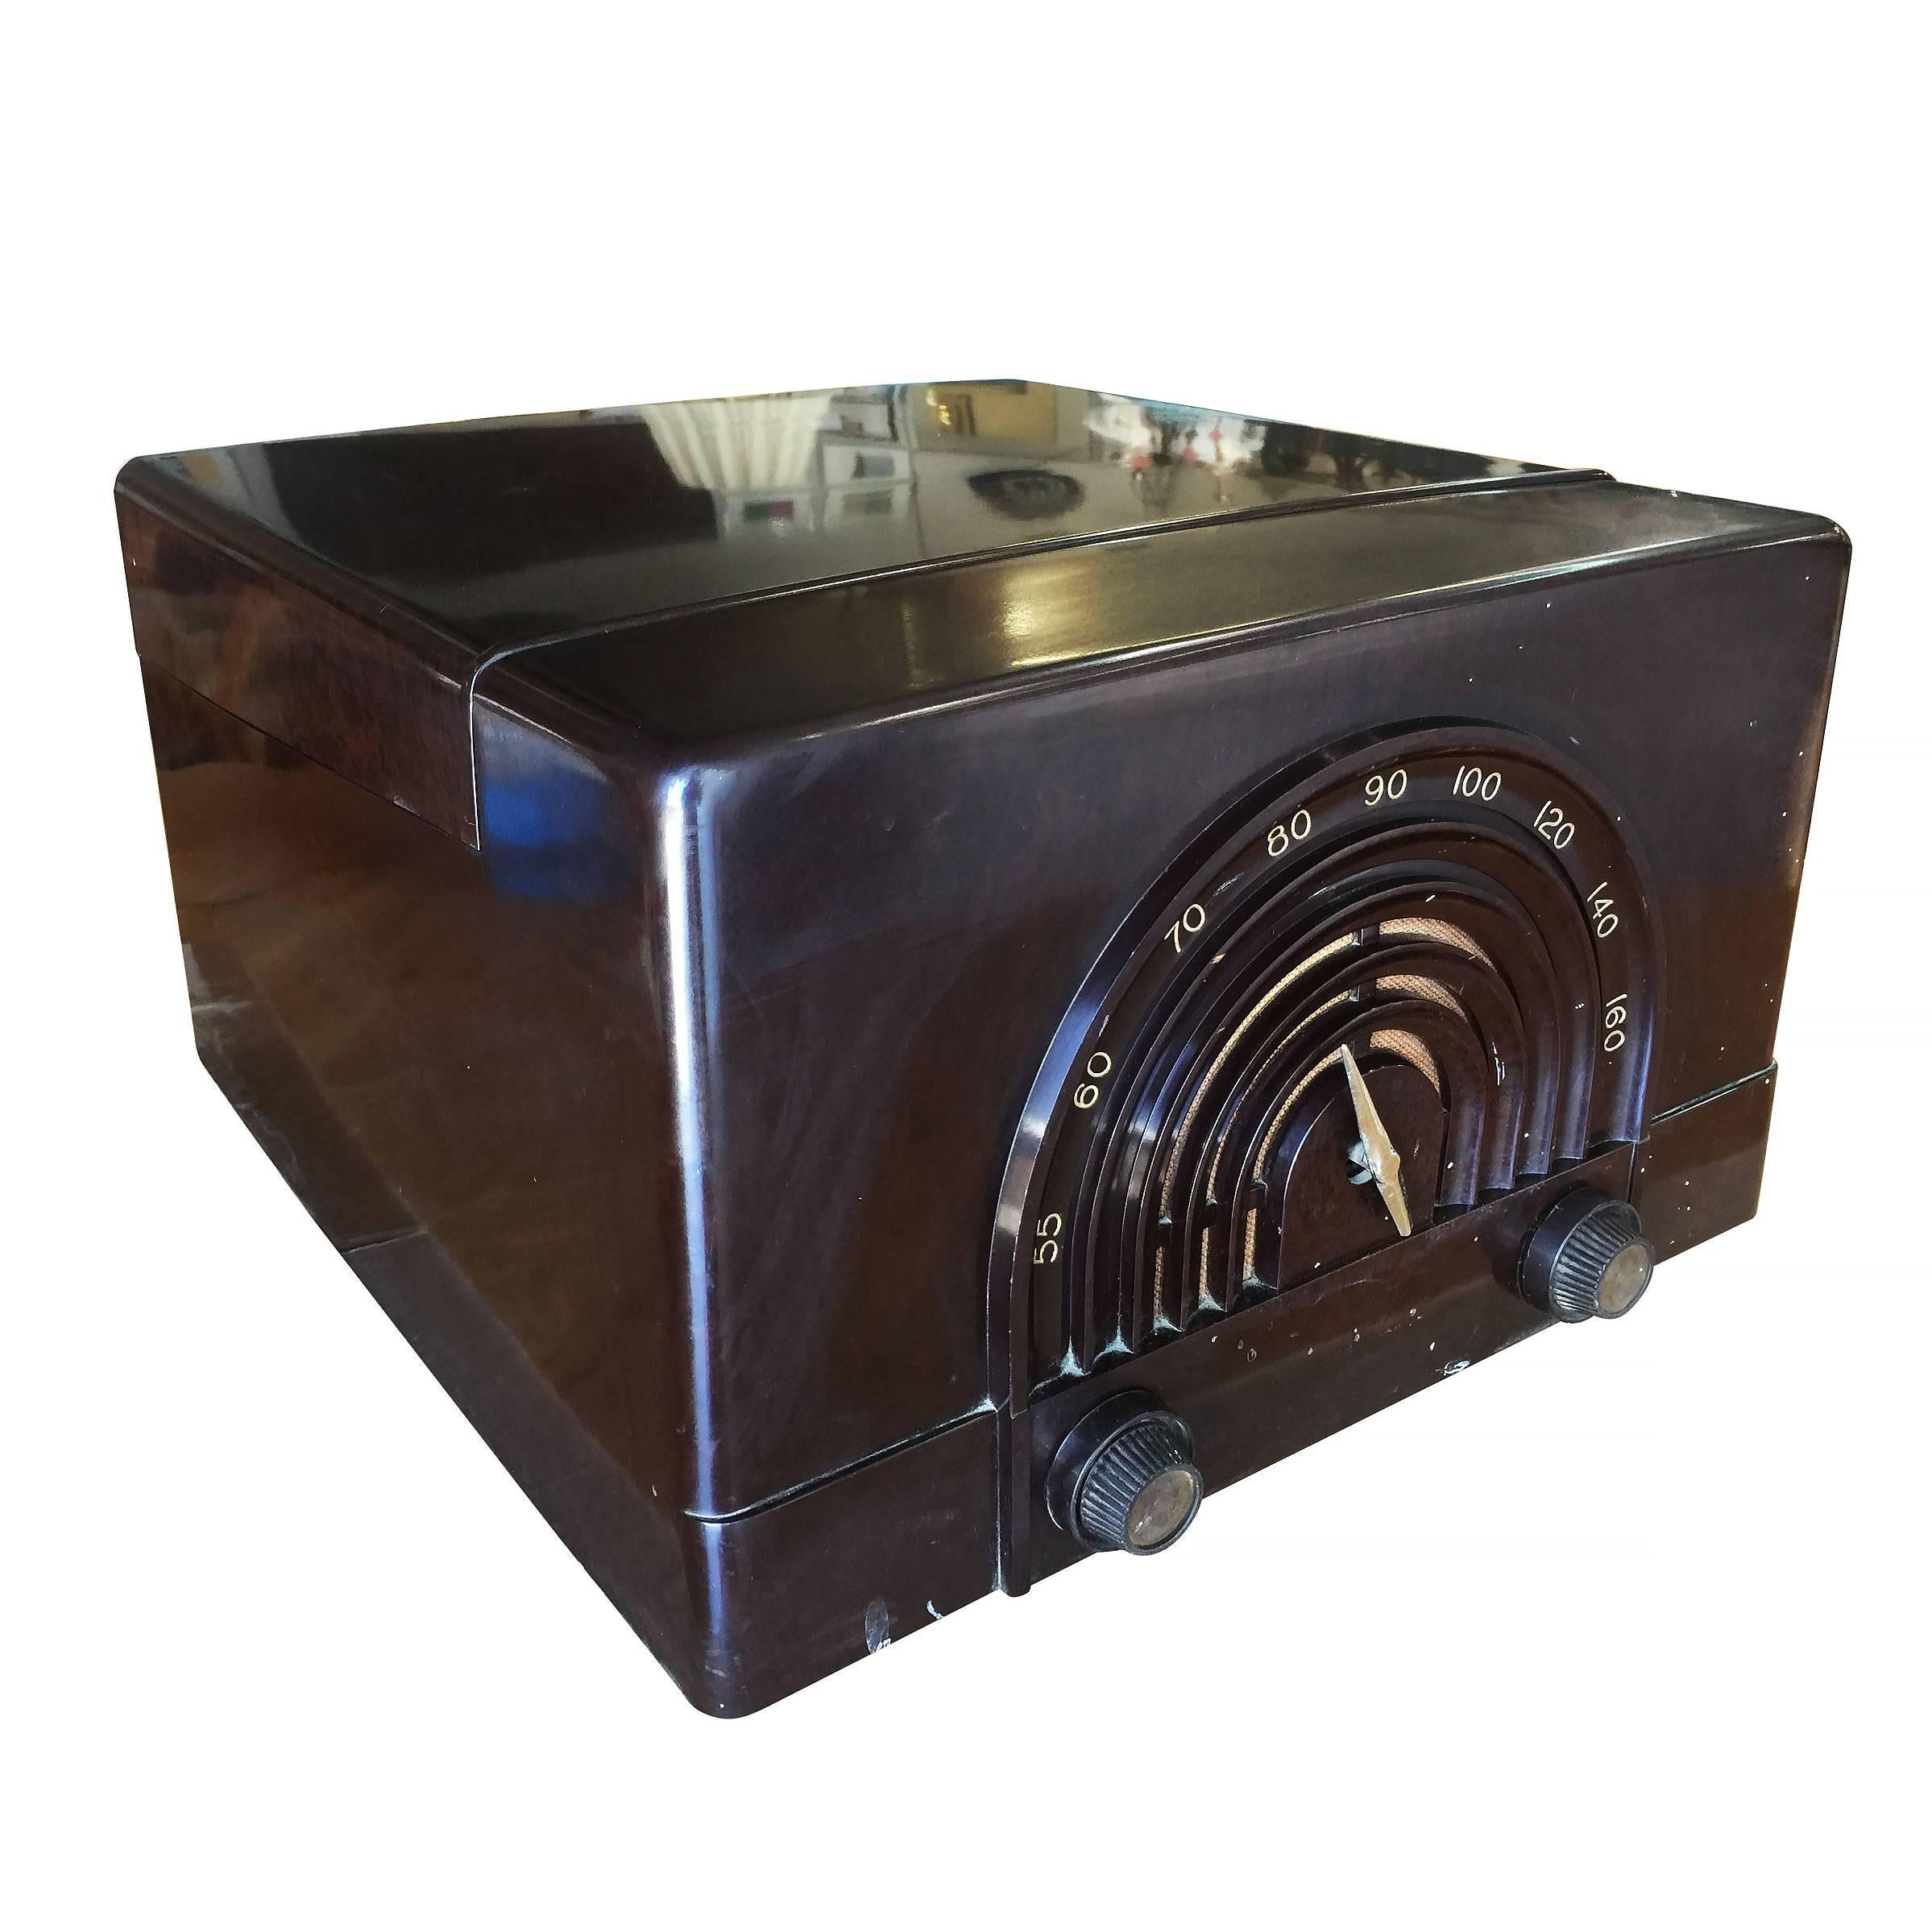 Silvertone Model 3040 Am radio and record player with a large bakelite shell. Inside is a five tube Superheterodyne AM radio receiver, Original old Sams Photofact manual includes schematic, layout, alignment instructions, voltage and resistance test